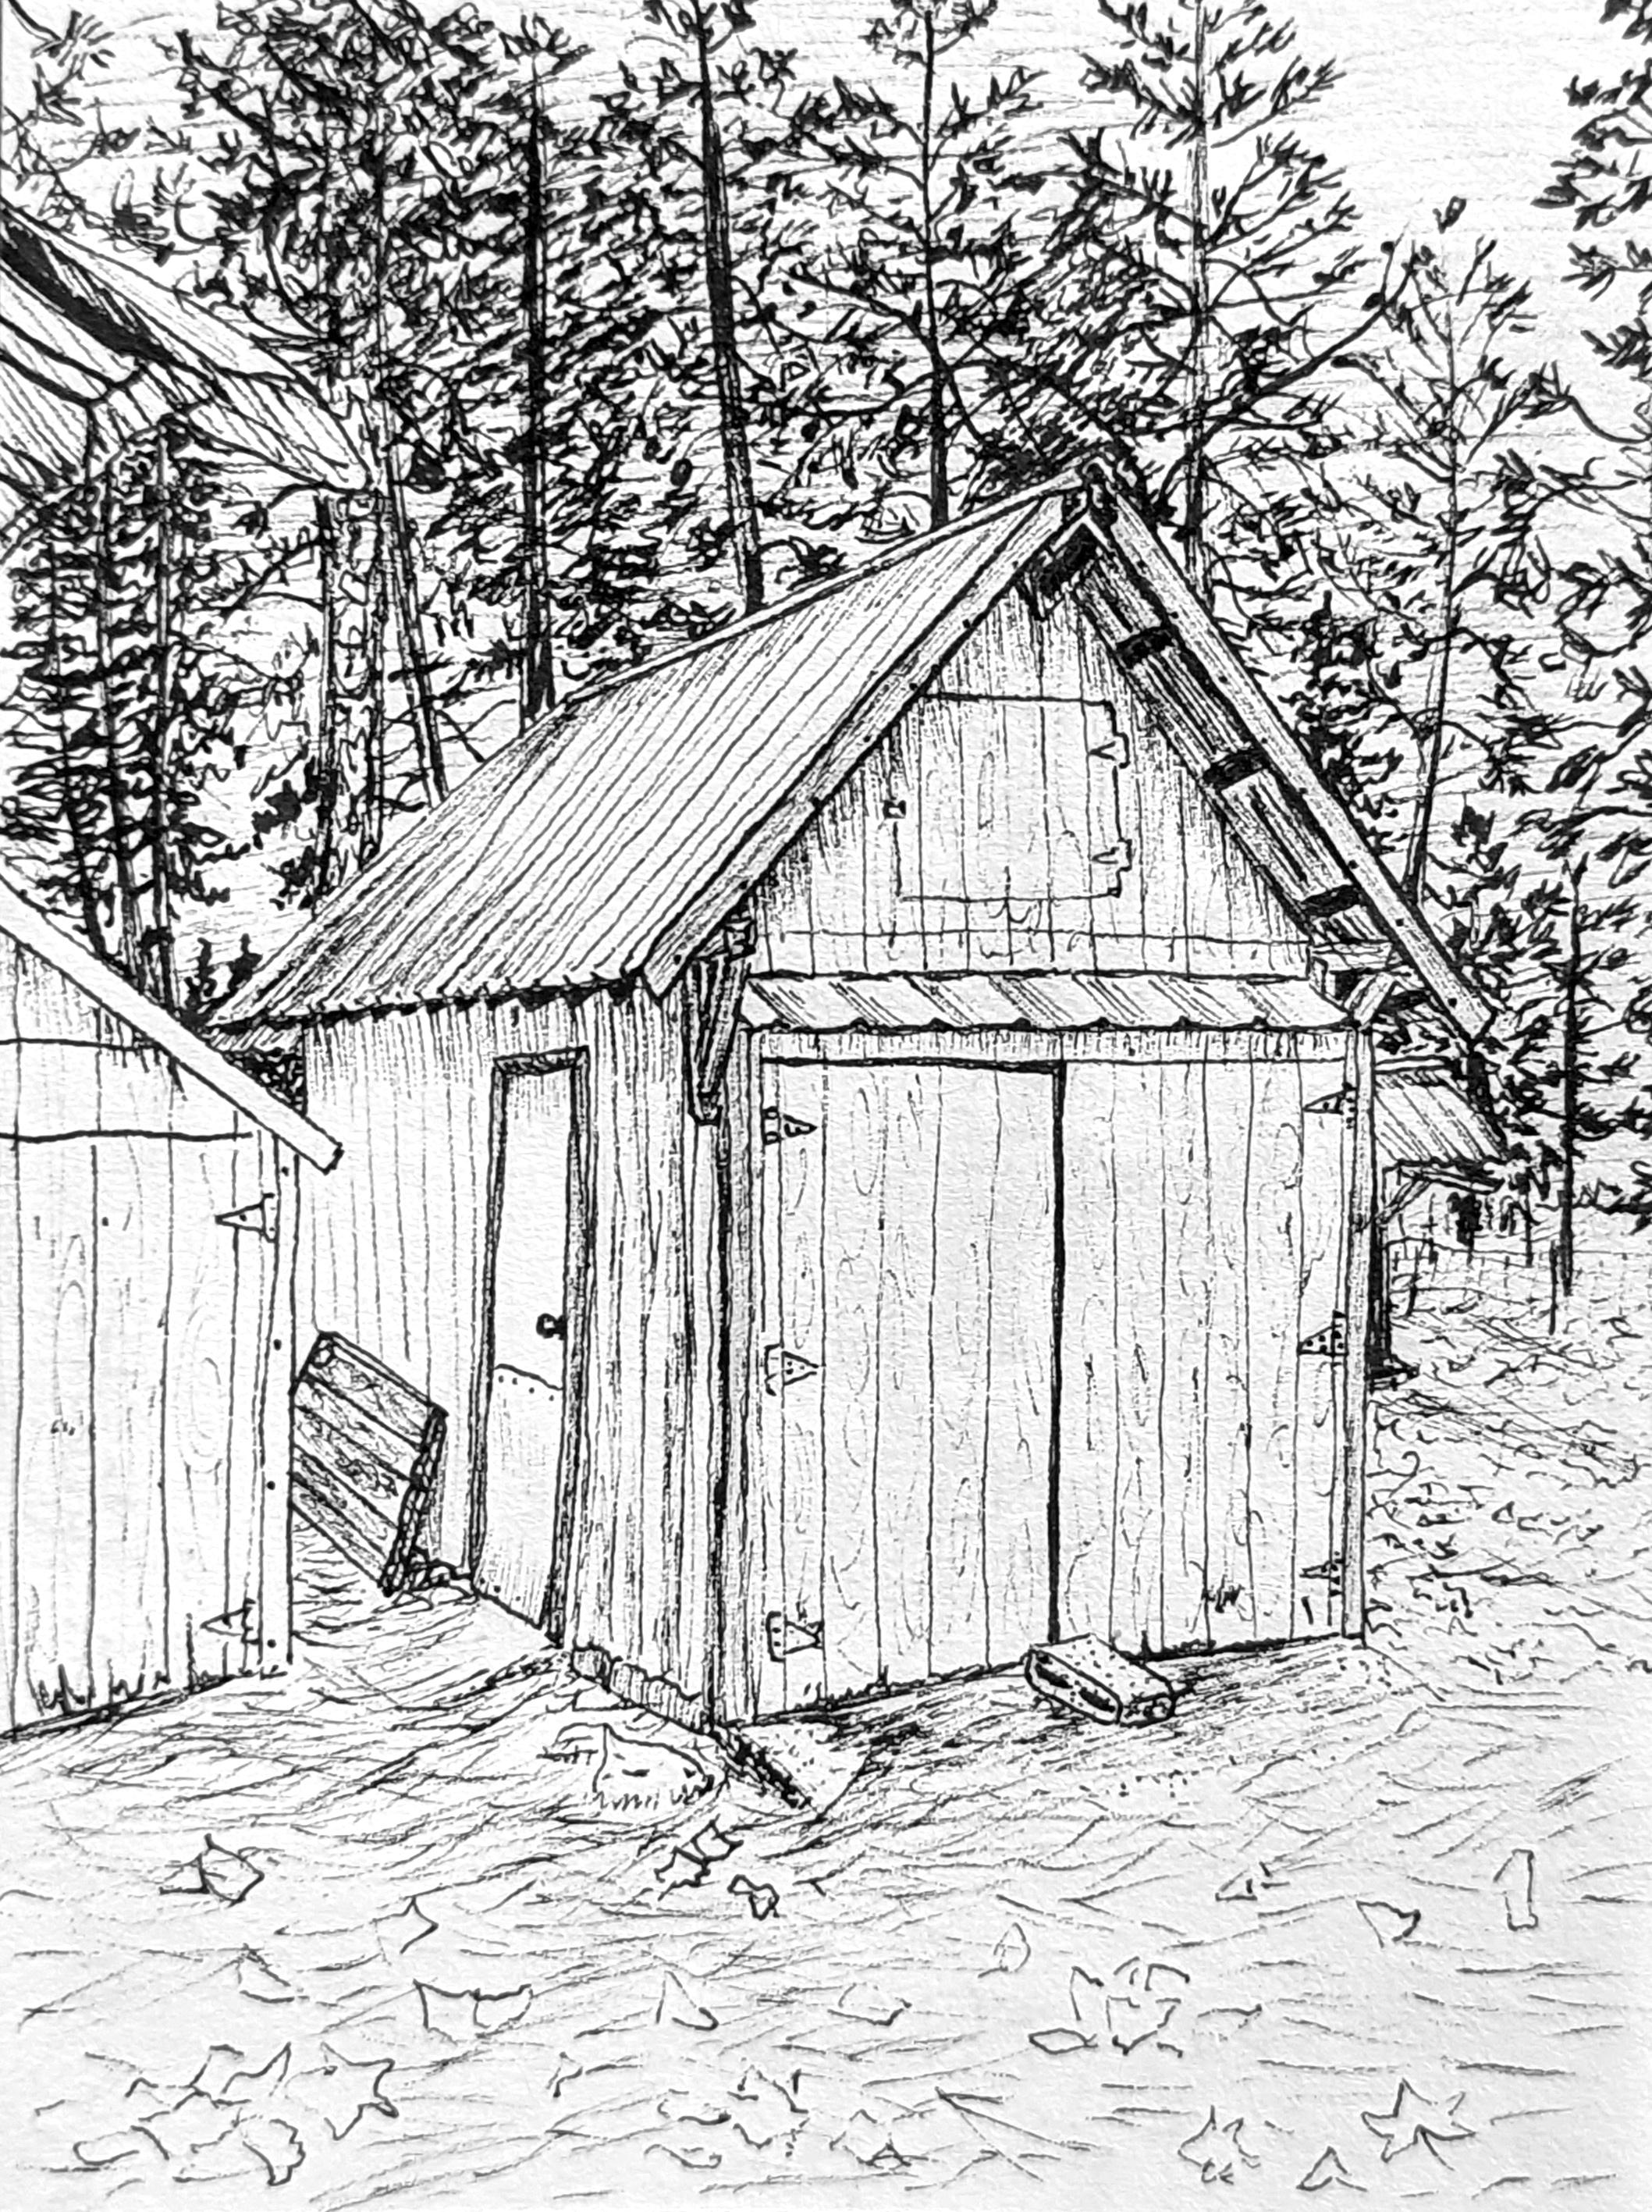 The old shed – Kitchell Studio